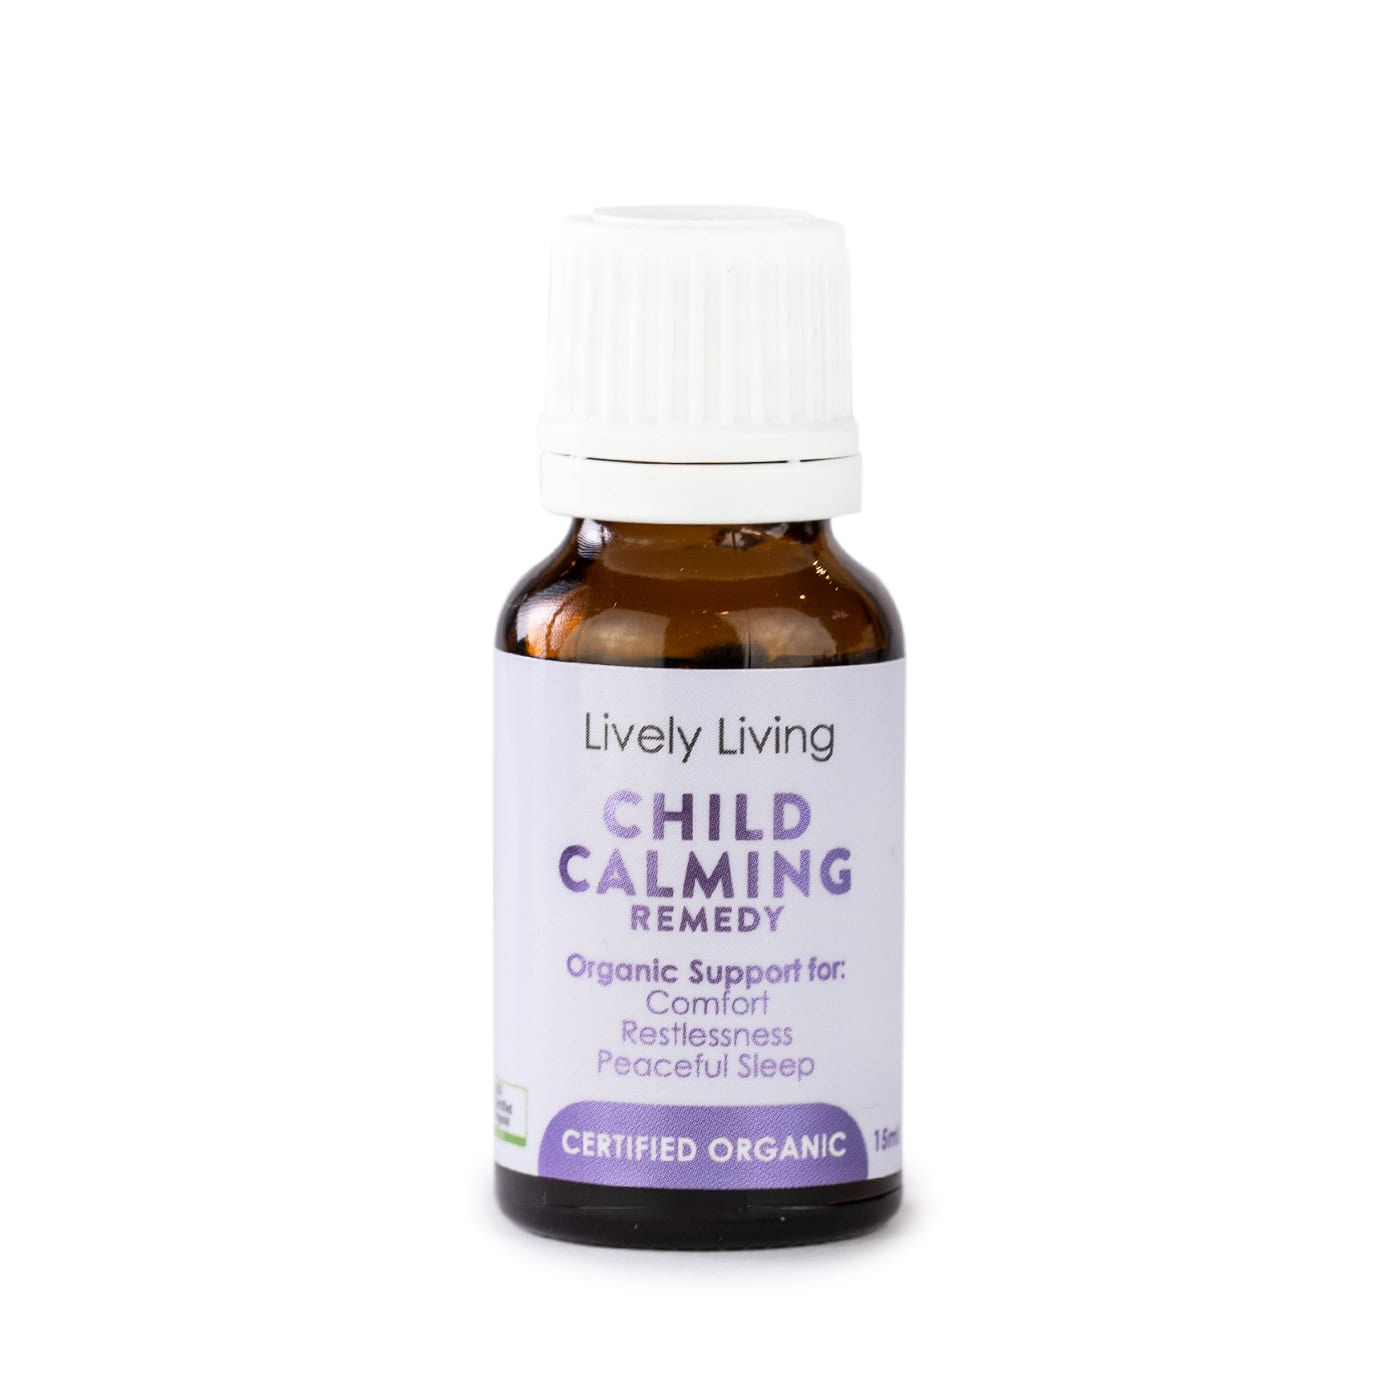 Lively Living Child Calming Essential Oil Blend